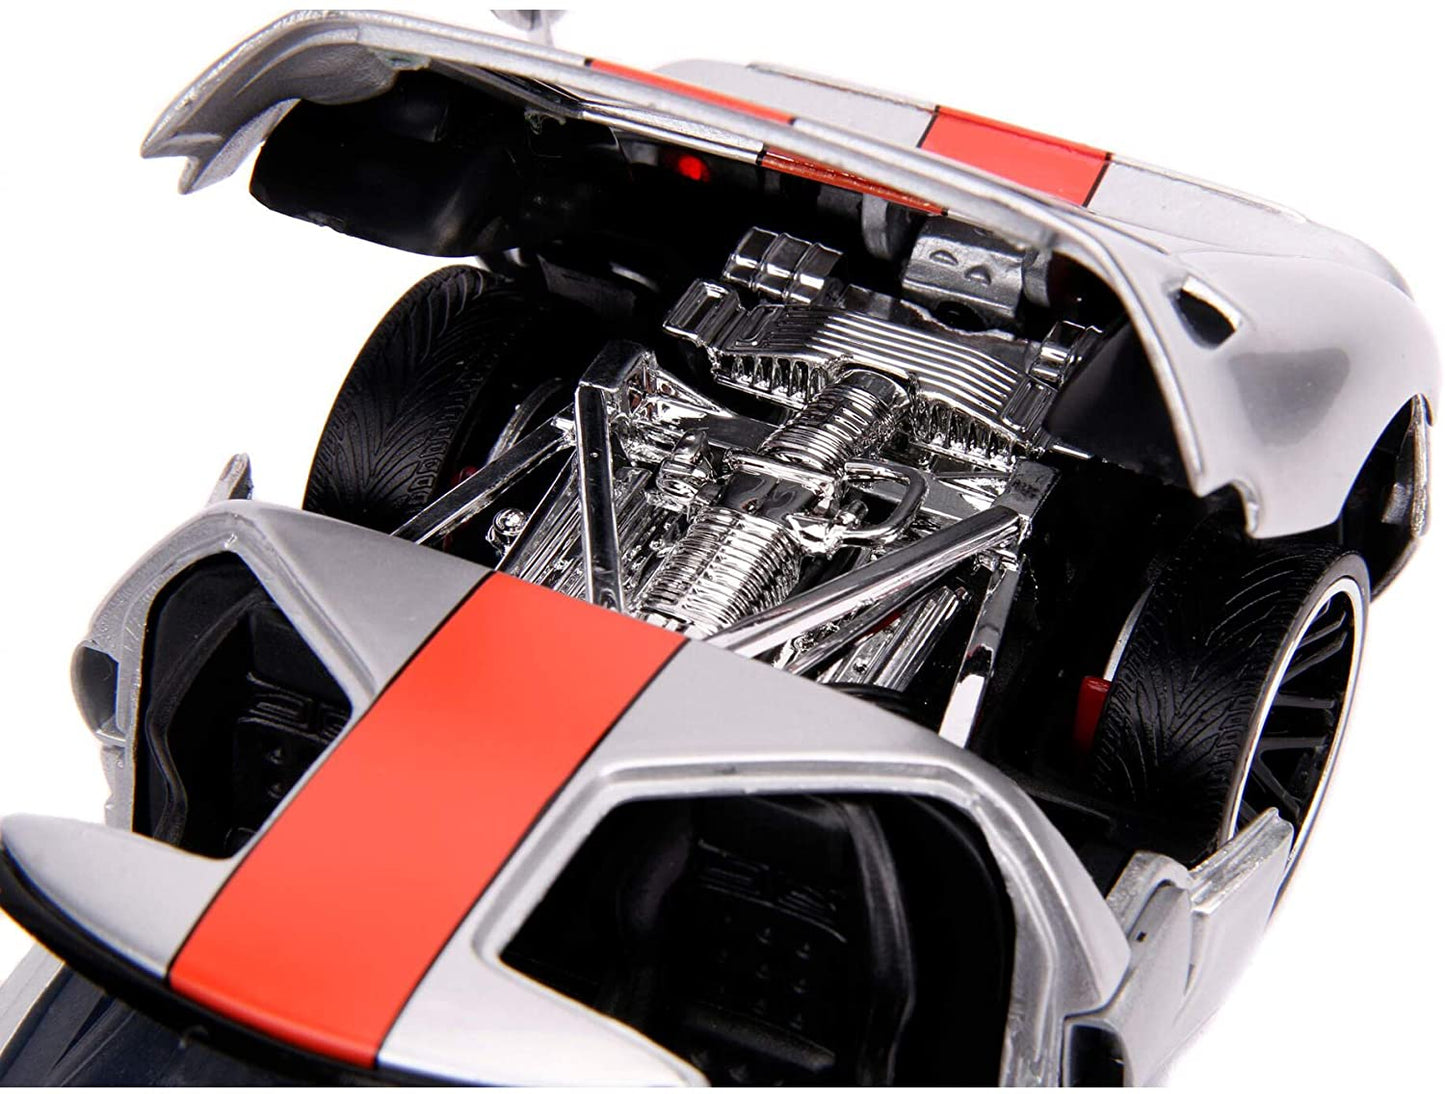 Jada Toys Bigtime Muscle 1:24 2005 Ford GT Die-cast Car Silver/Orange, Toys for Kids and Adults